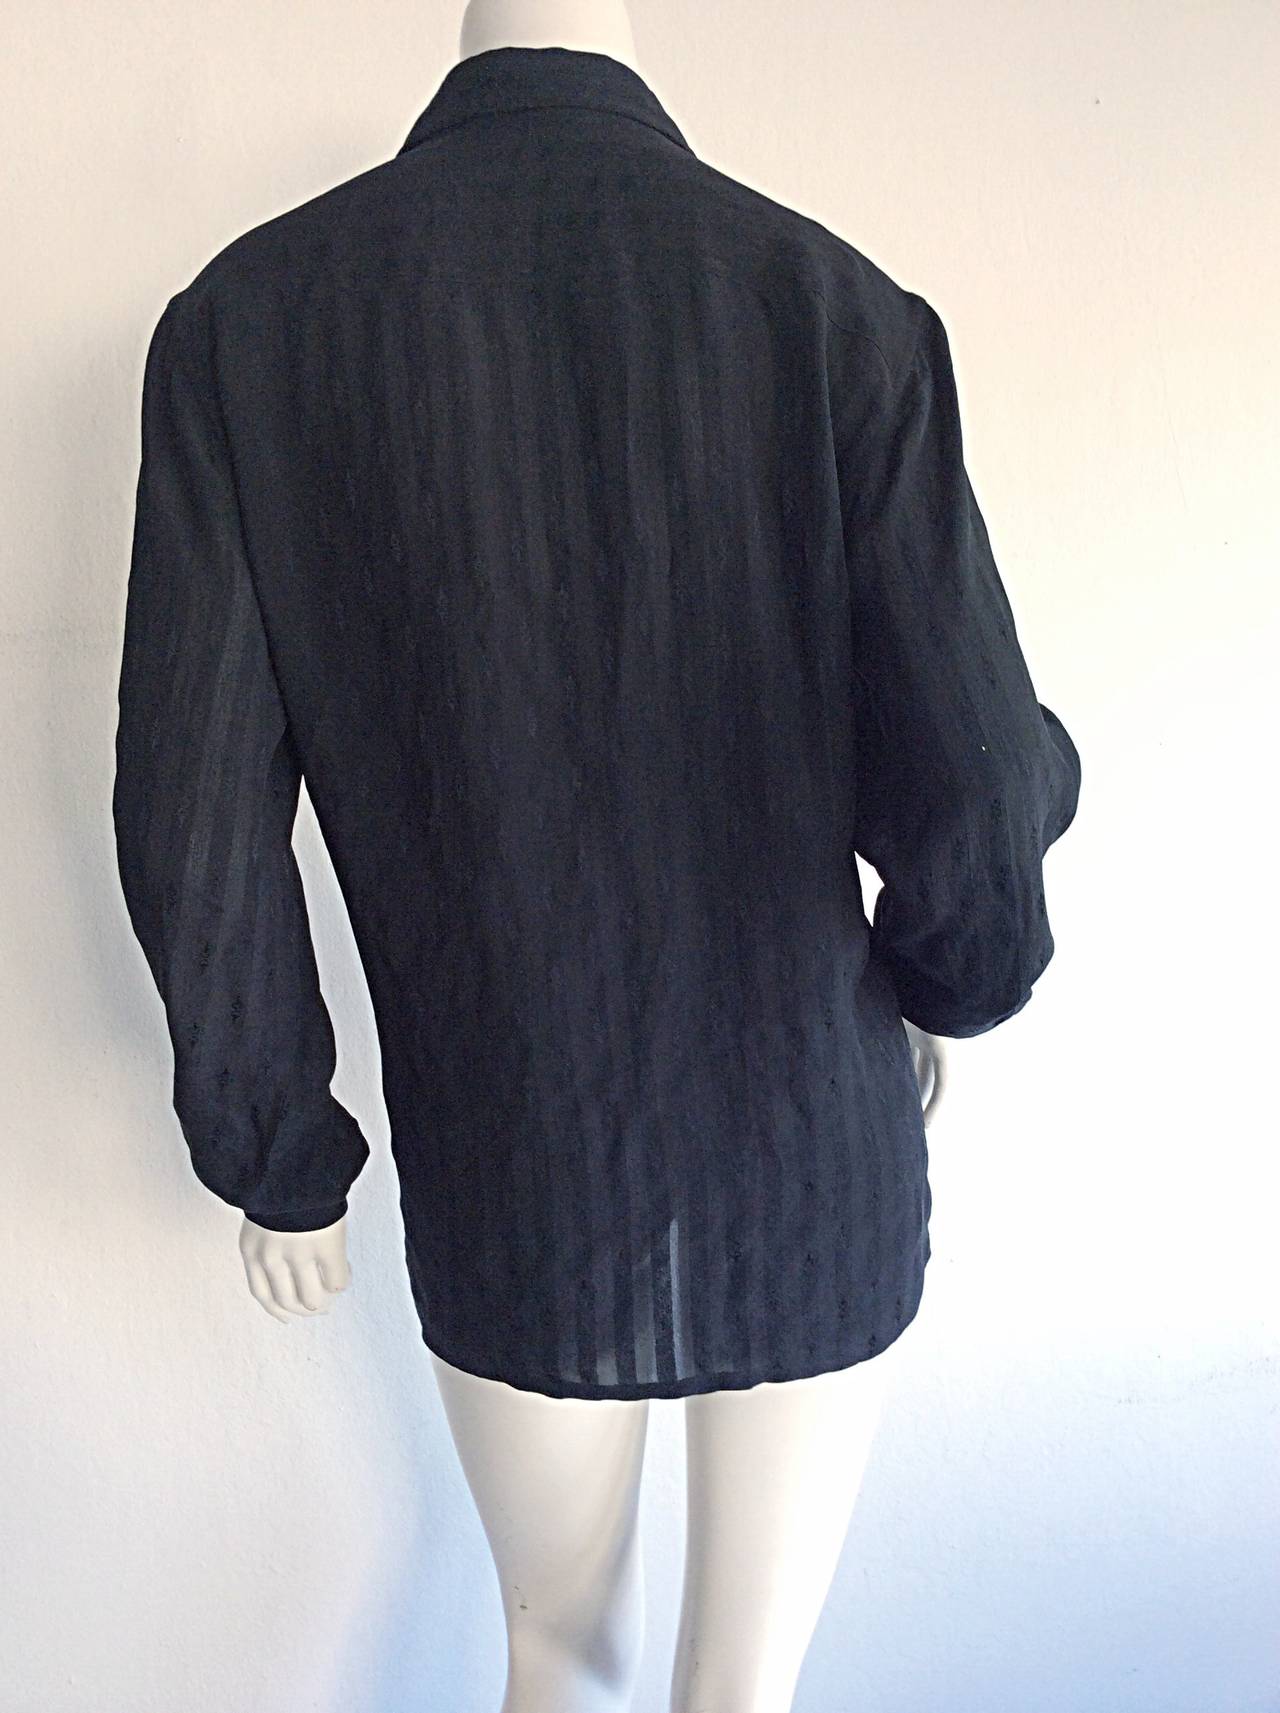 Iconic Vintage Gucci Black Silk Blouse Top Shirt w/ Horsebits and Logo ...